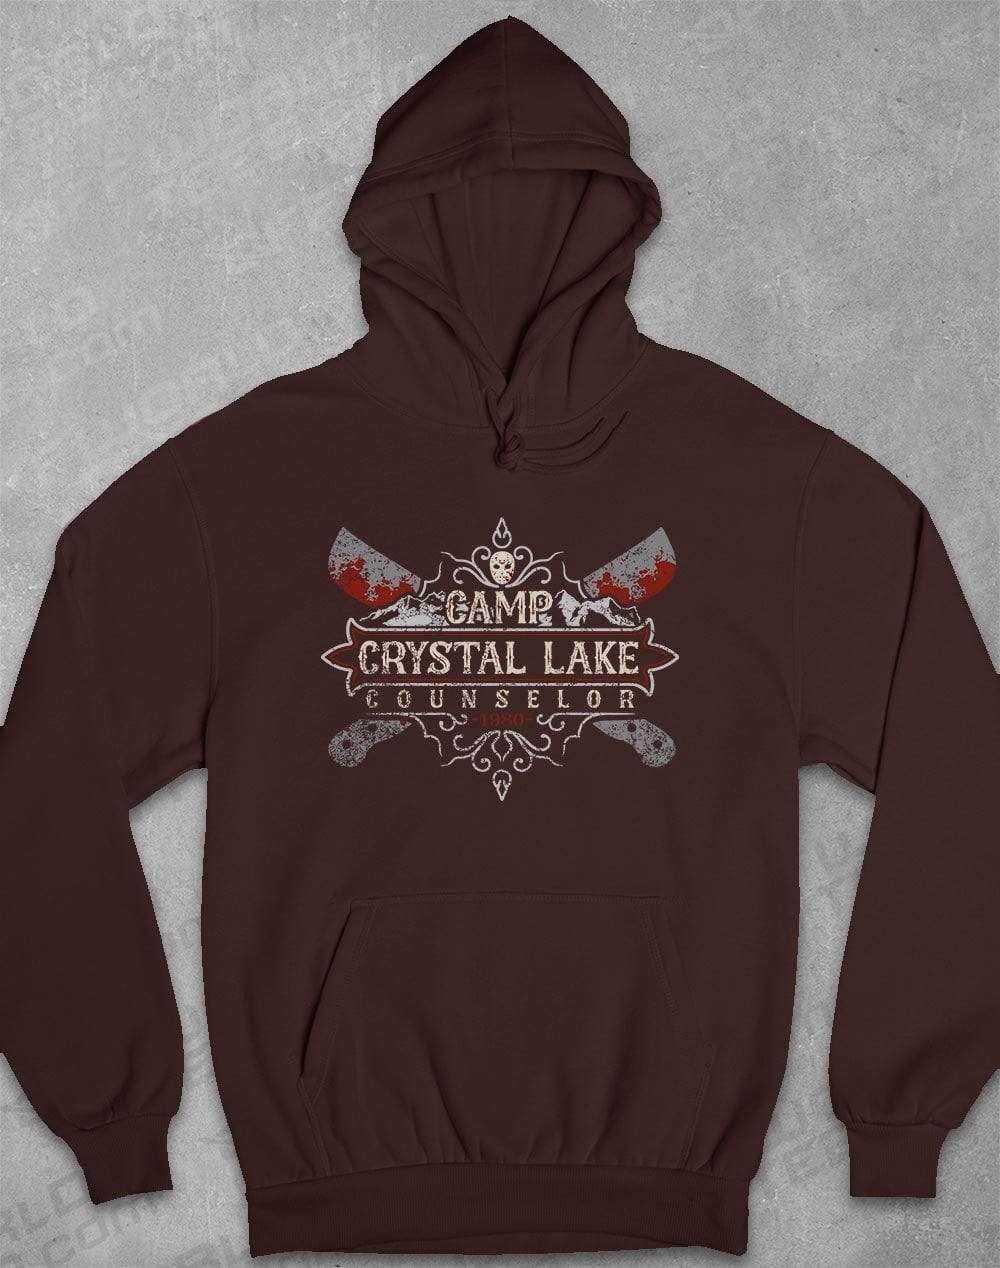 Camp Crystal Lake Counselor Hoodie S / Hot Chocolate  - Off World Tees